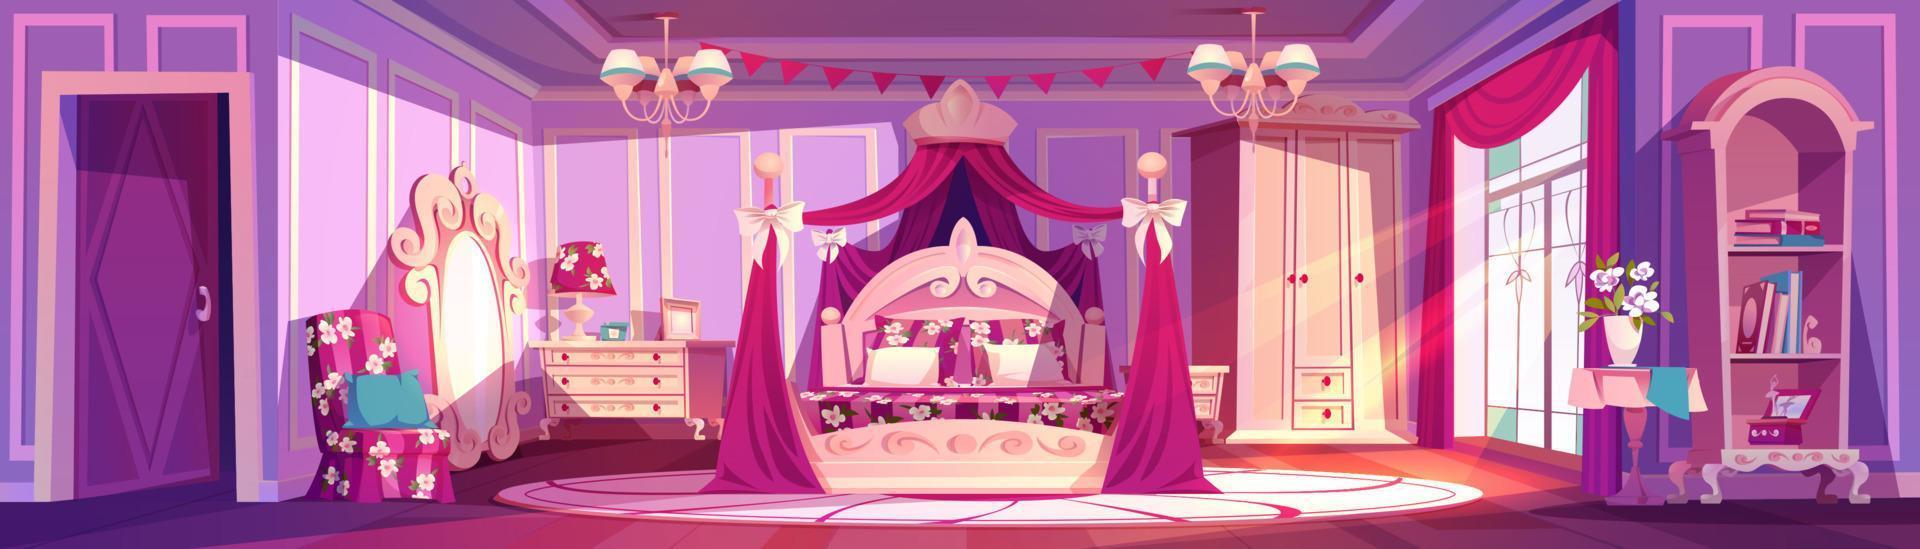 Luxury princess bedroom in royal palace vector